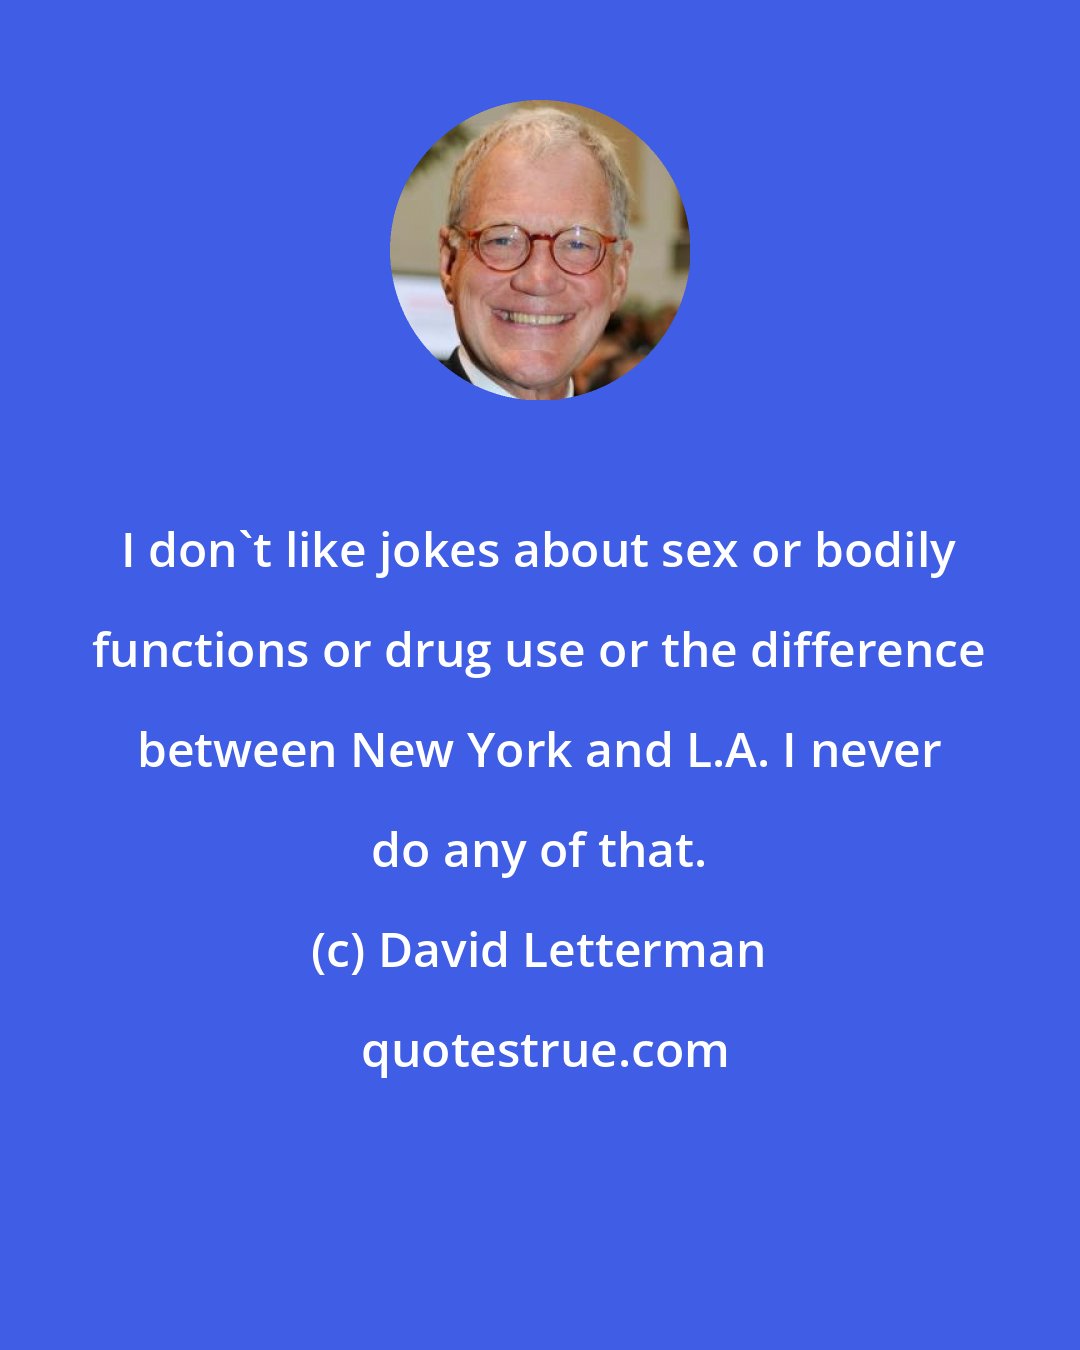 David Letterman: I don't like jokes about sex or bodily functions or drug use or the difference between New York and L.A. I never do any of that.